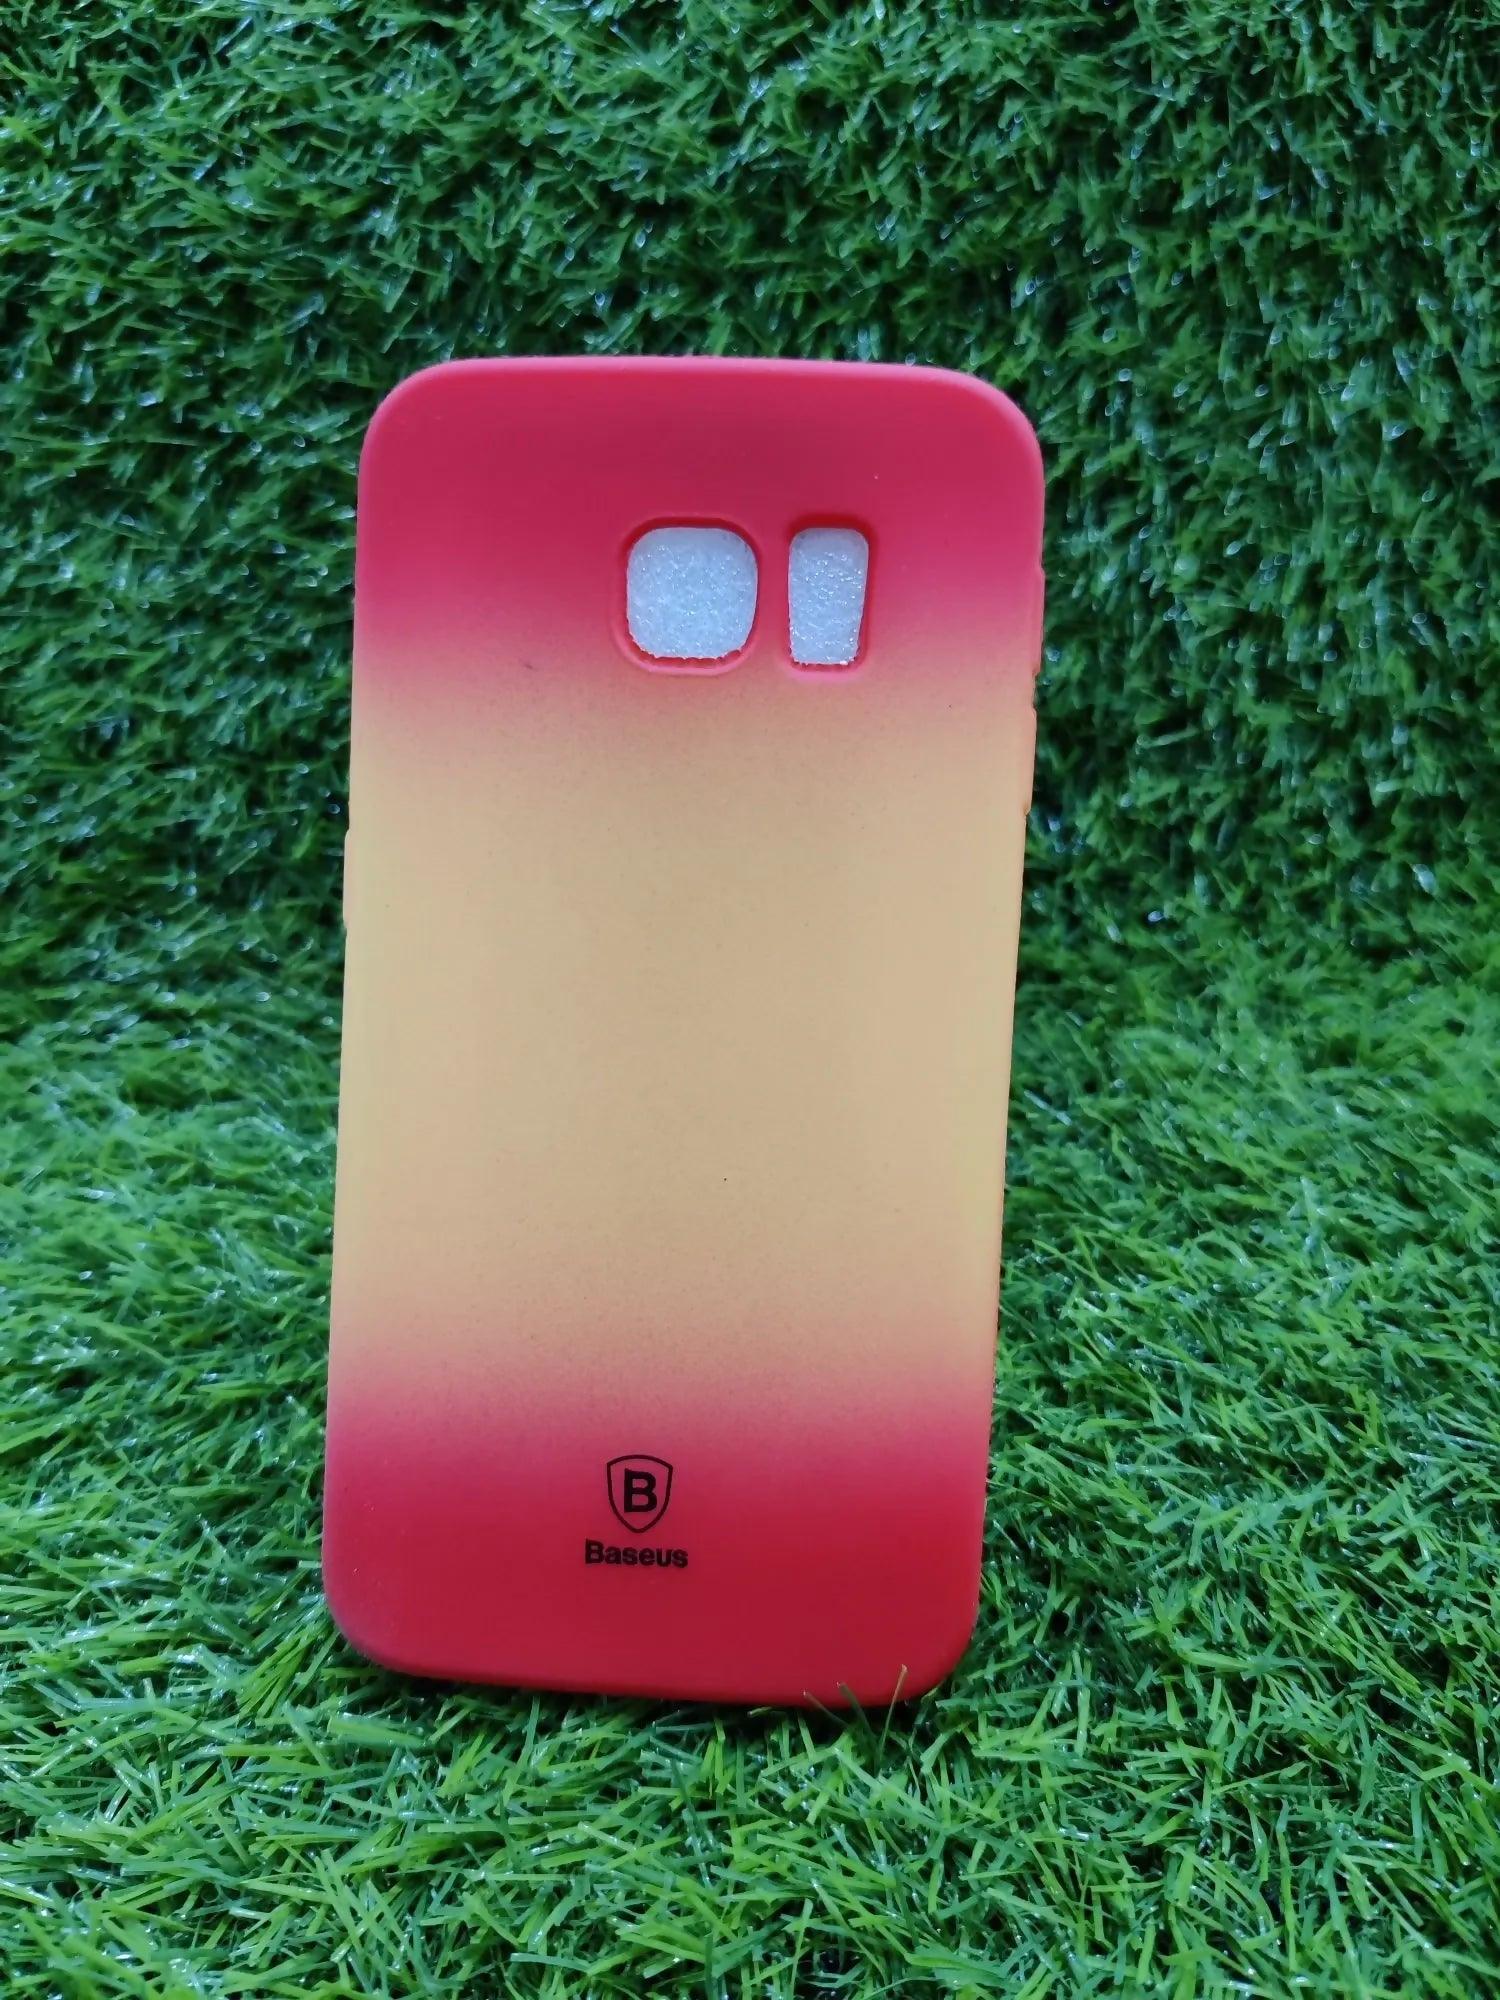 Samsung s6 edge Back covers - ValueBox